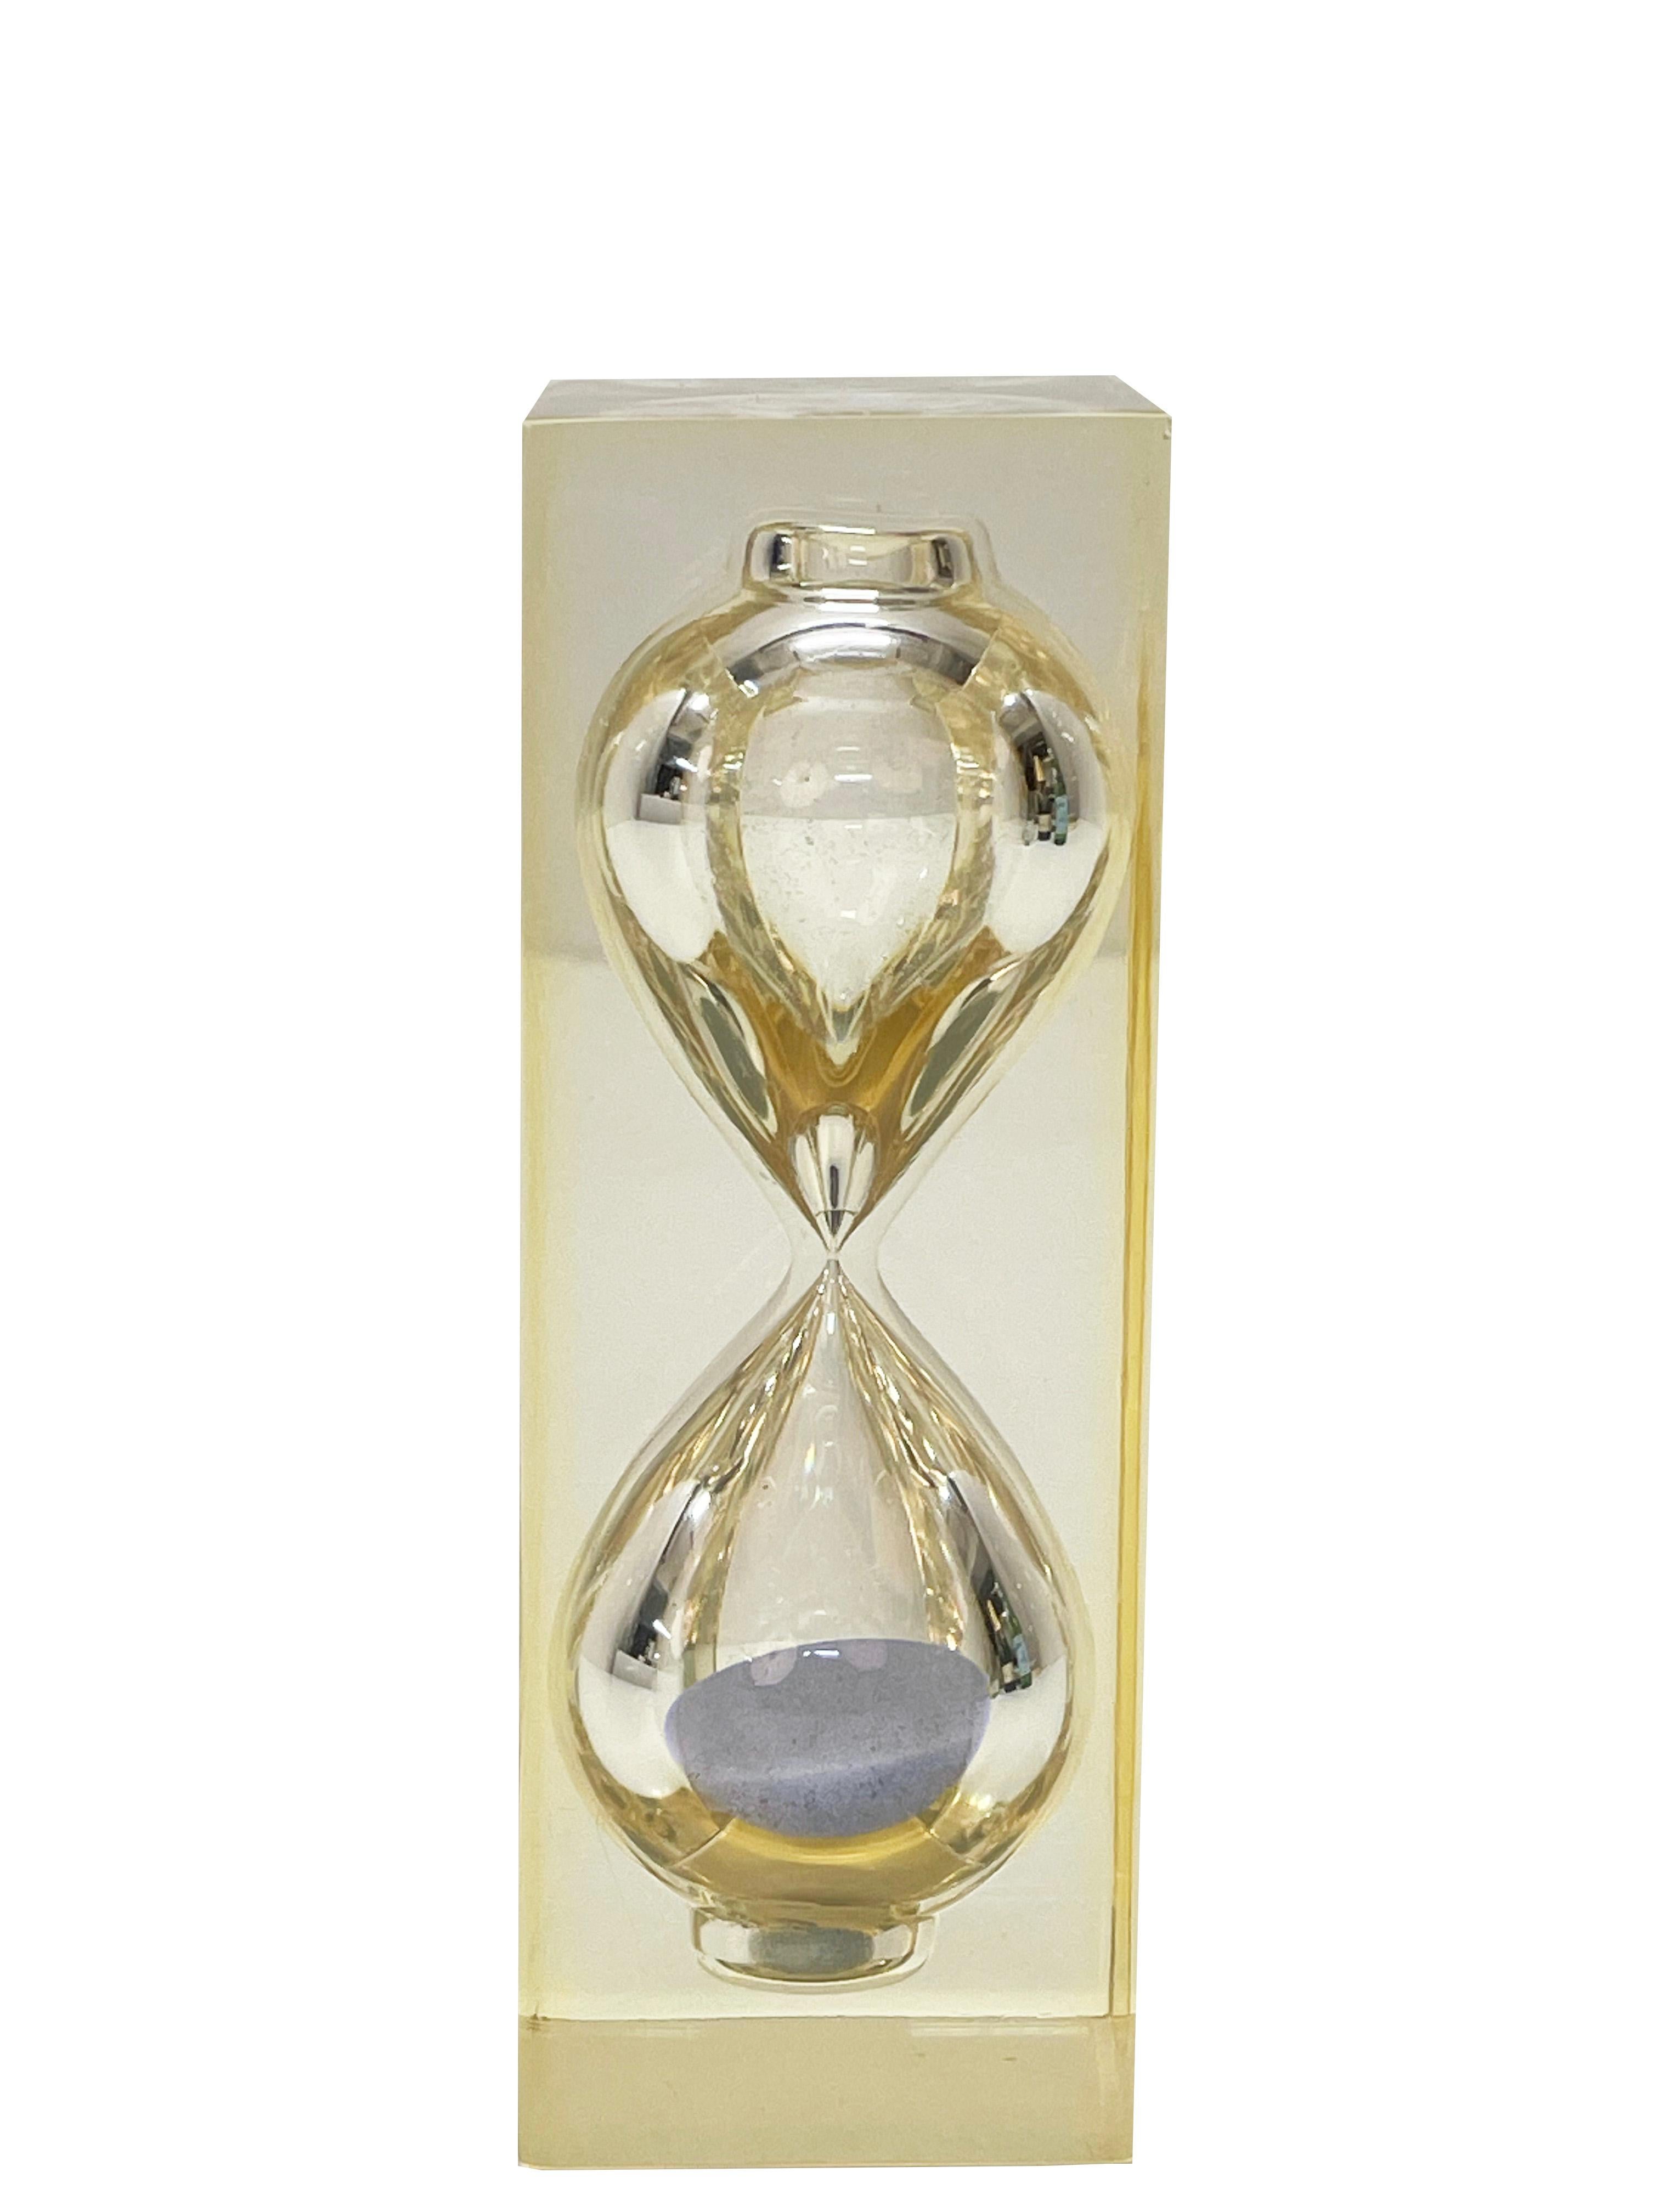 Midcentury Lucite Hourglass Sand Timer Sculpture After Charles Hollis Jones 1970 For Sale 5